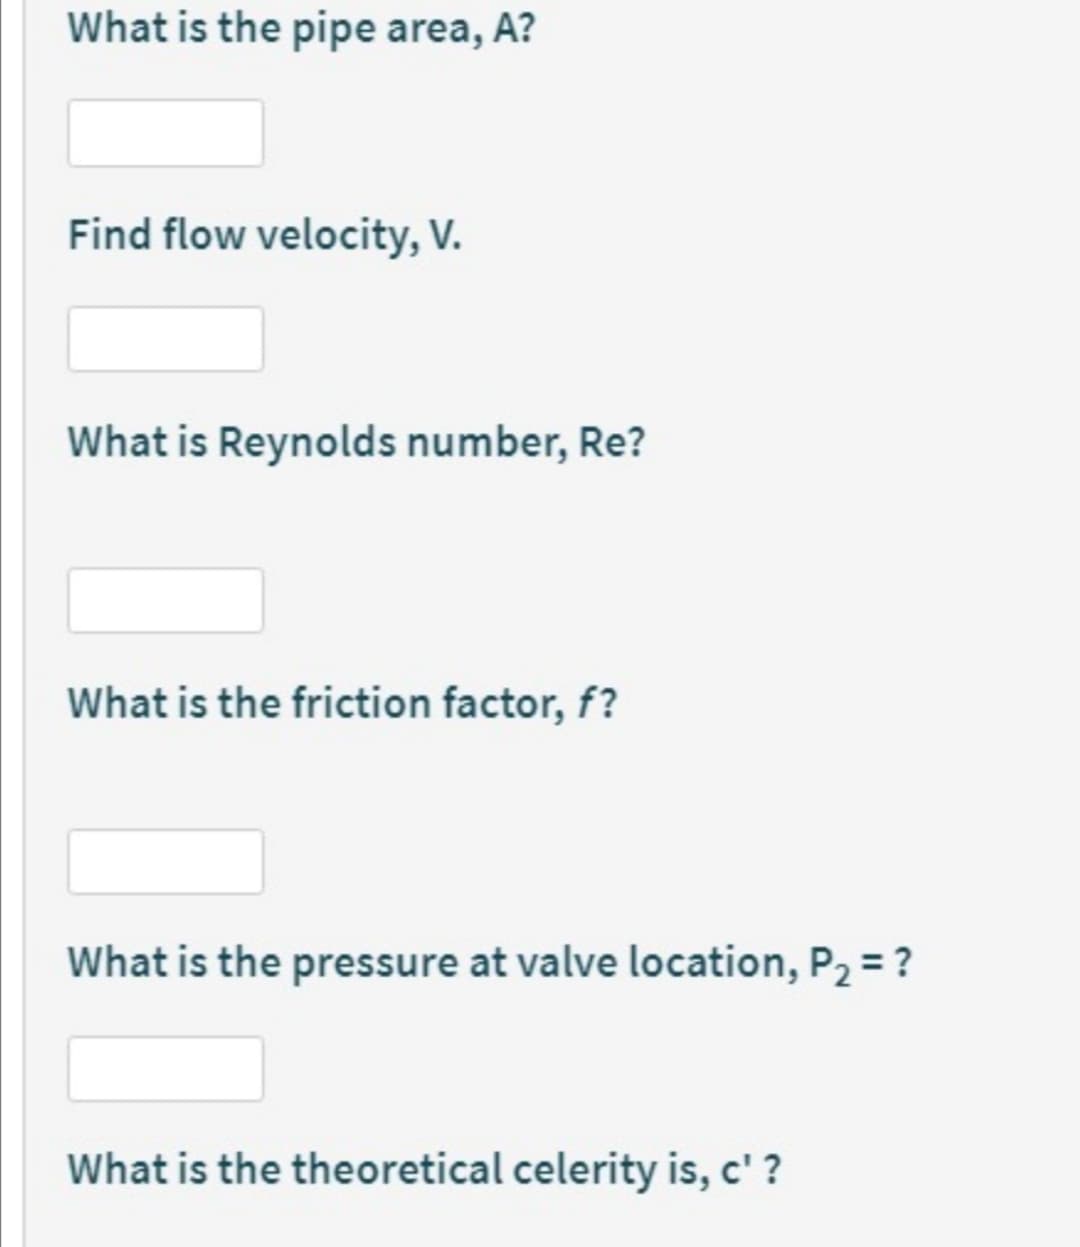 What is the pipe area, A?
Find flow velocity, V.
What is Reynolds number, Re?
What is the friction factor, f?
What is the pressure at valve location, P2 = ?
What is the theoretical celerity is, c' ?
